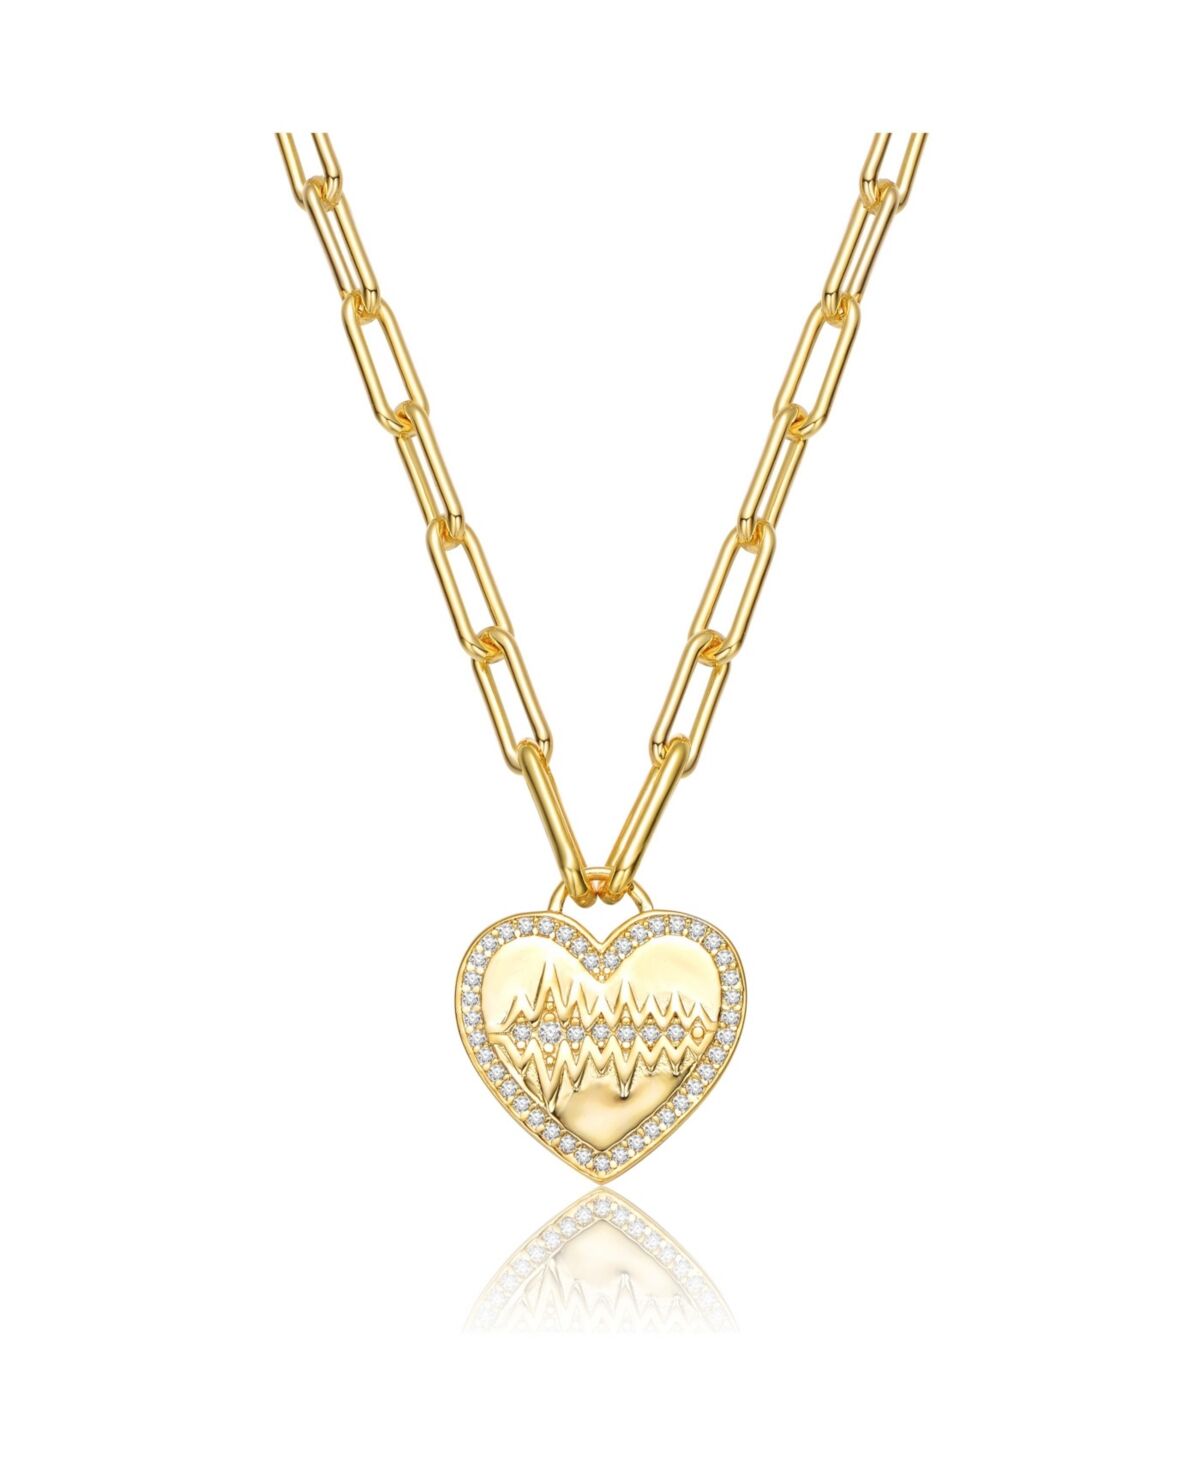 GiGiGirl Chic Teens/Young Adults 14K Gold Plated Cubic Zirconia Heart Charm Necklace - Gold